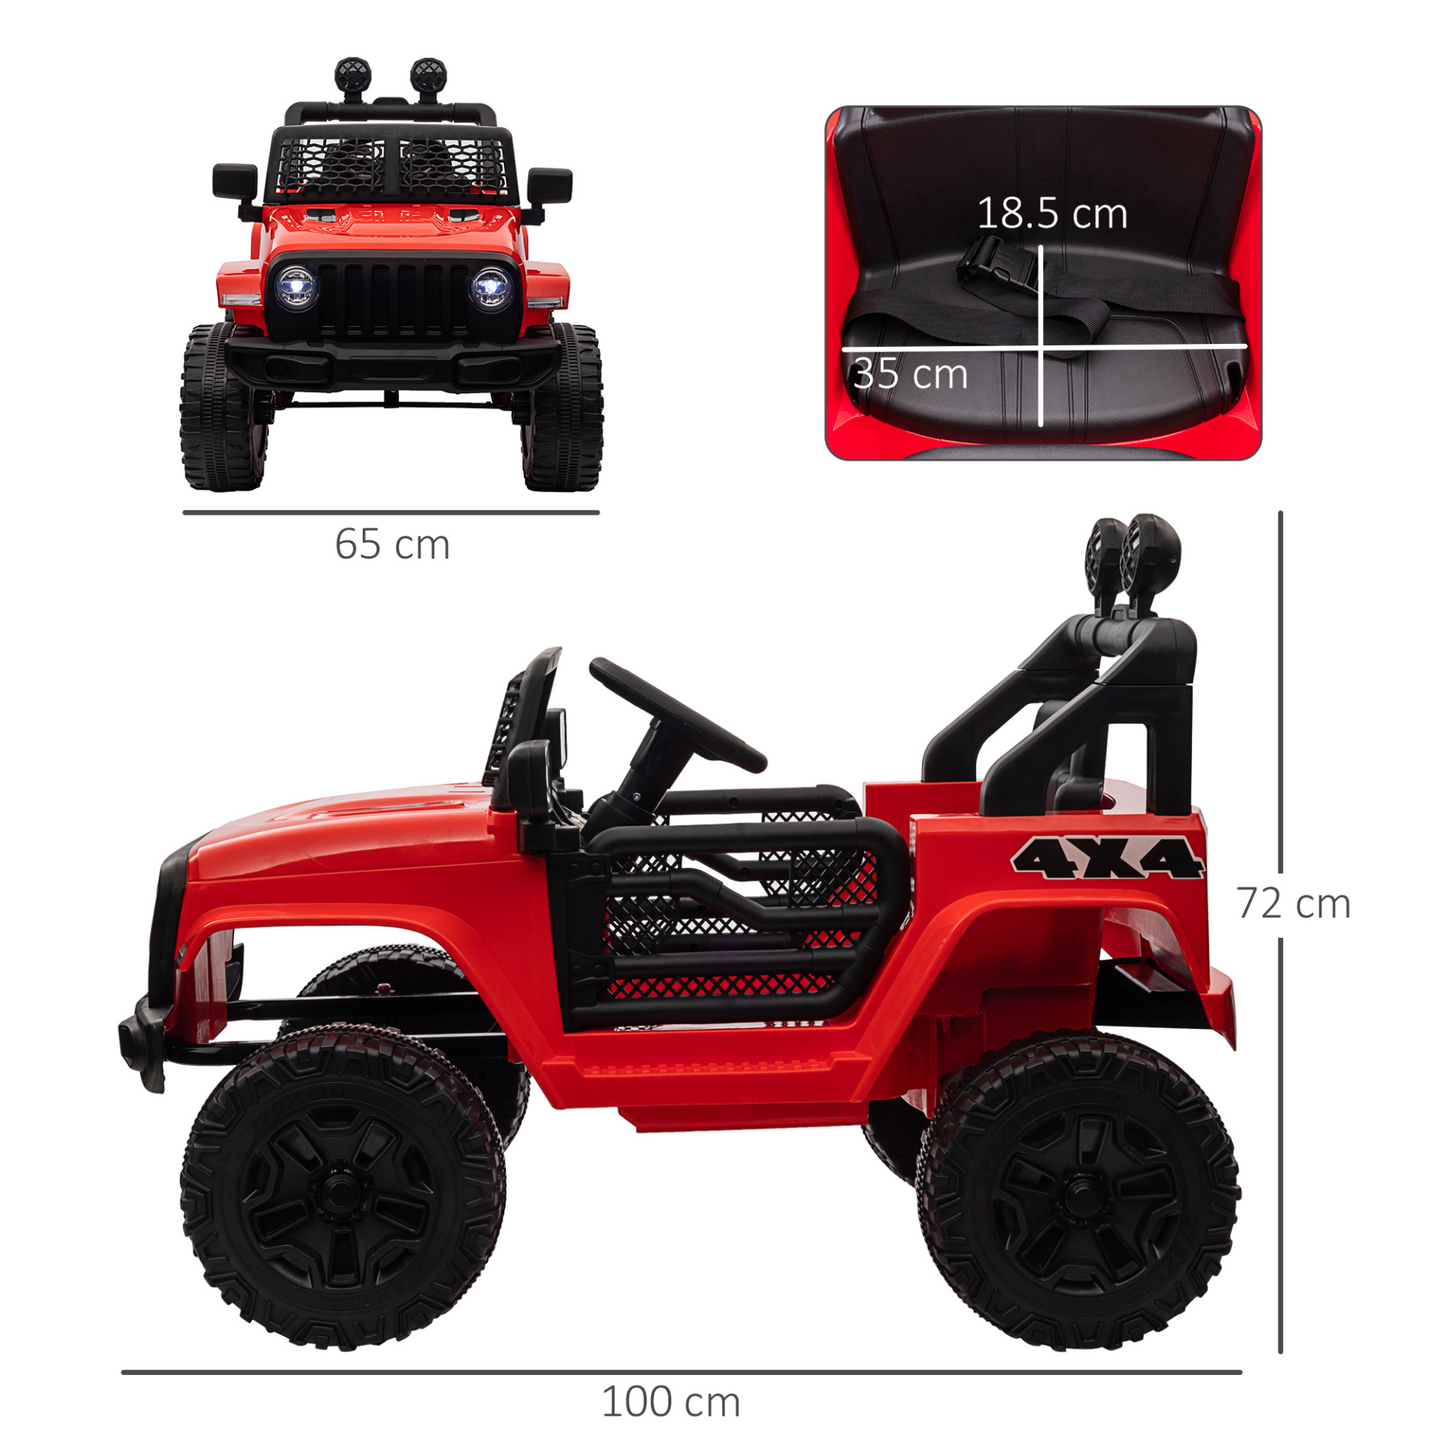 HOMCOM 12V Battery-powered 2 Motors Kids Electric Ride On Car Truck Off-road Toy with Parental Remote Control Horn Lights Suspension Wheels for 3-6 Years Old Red